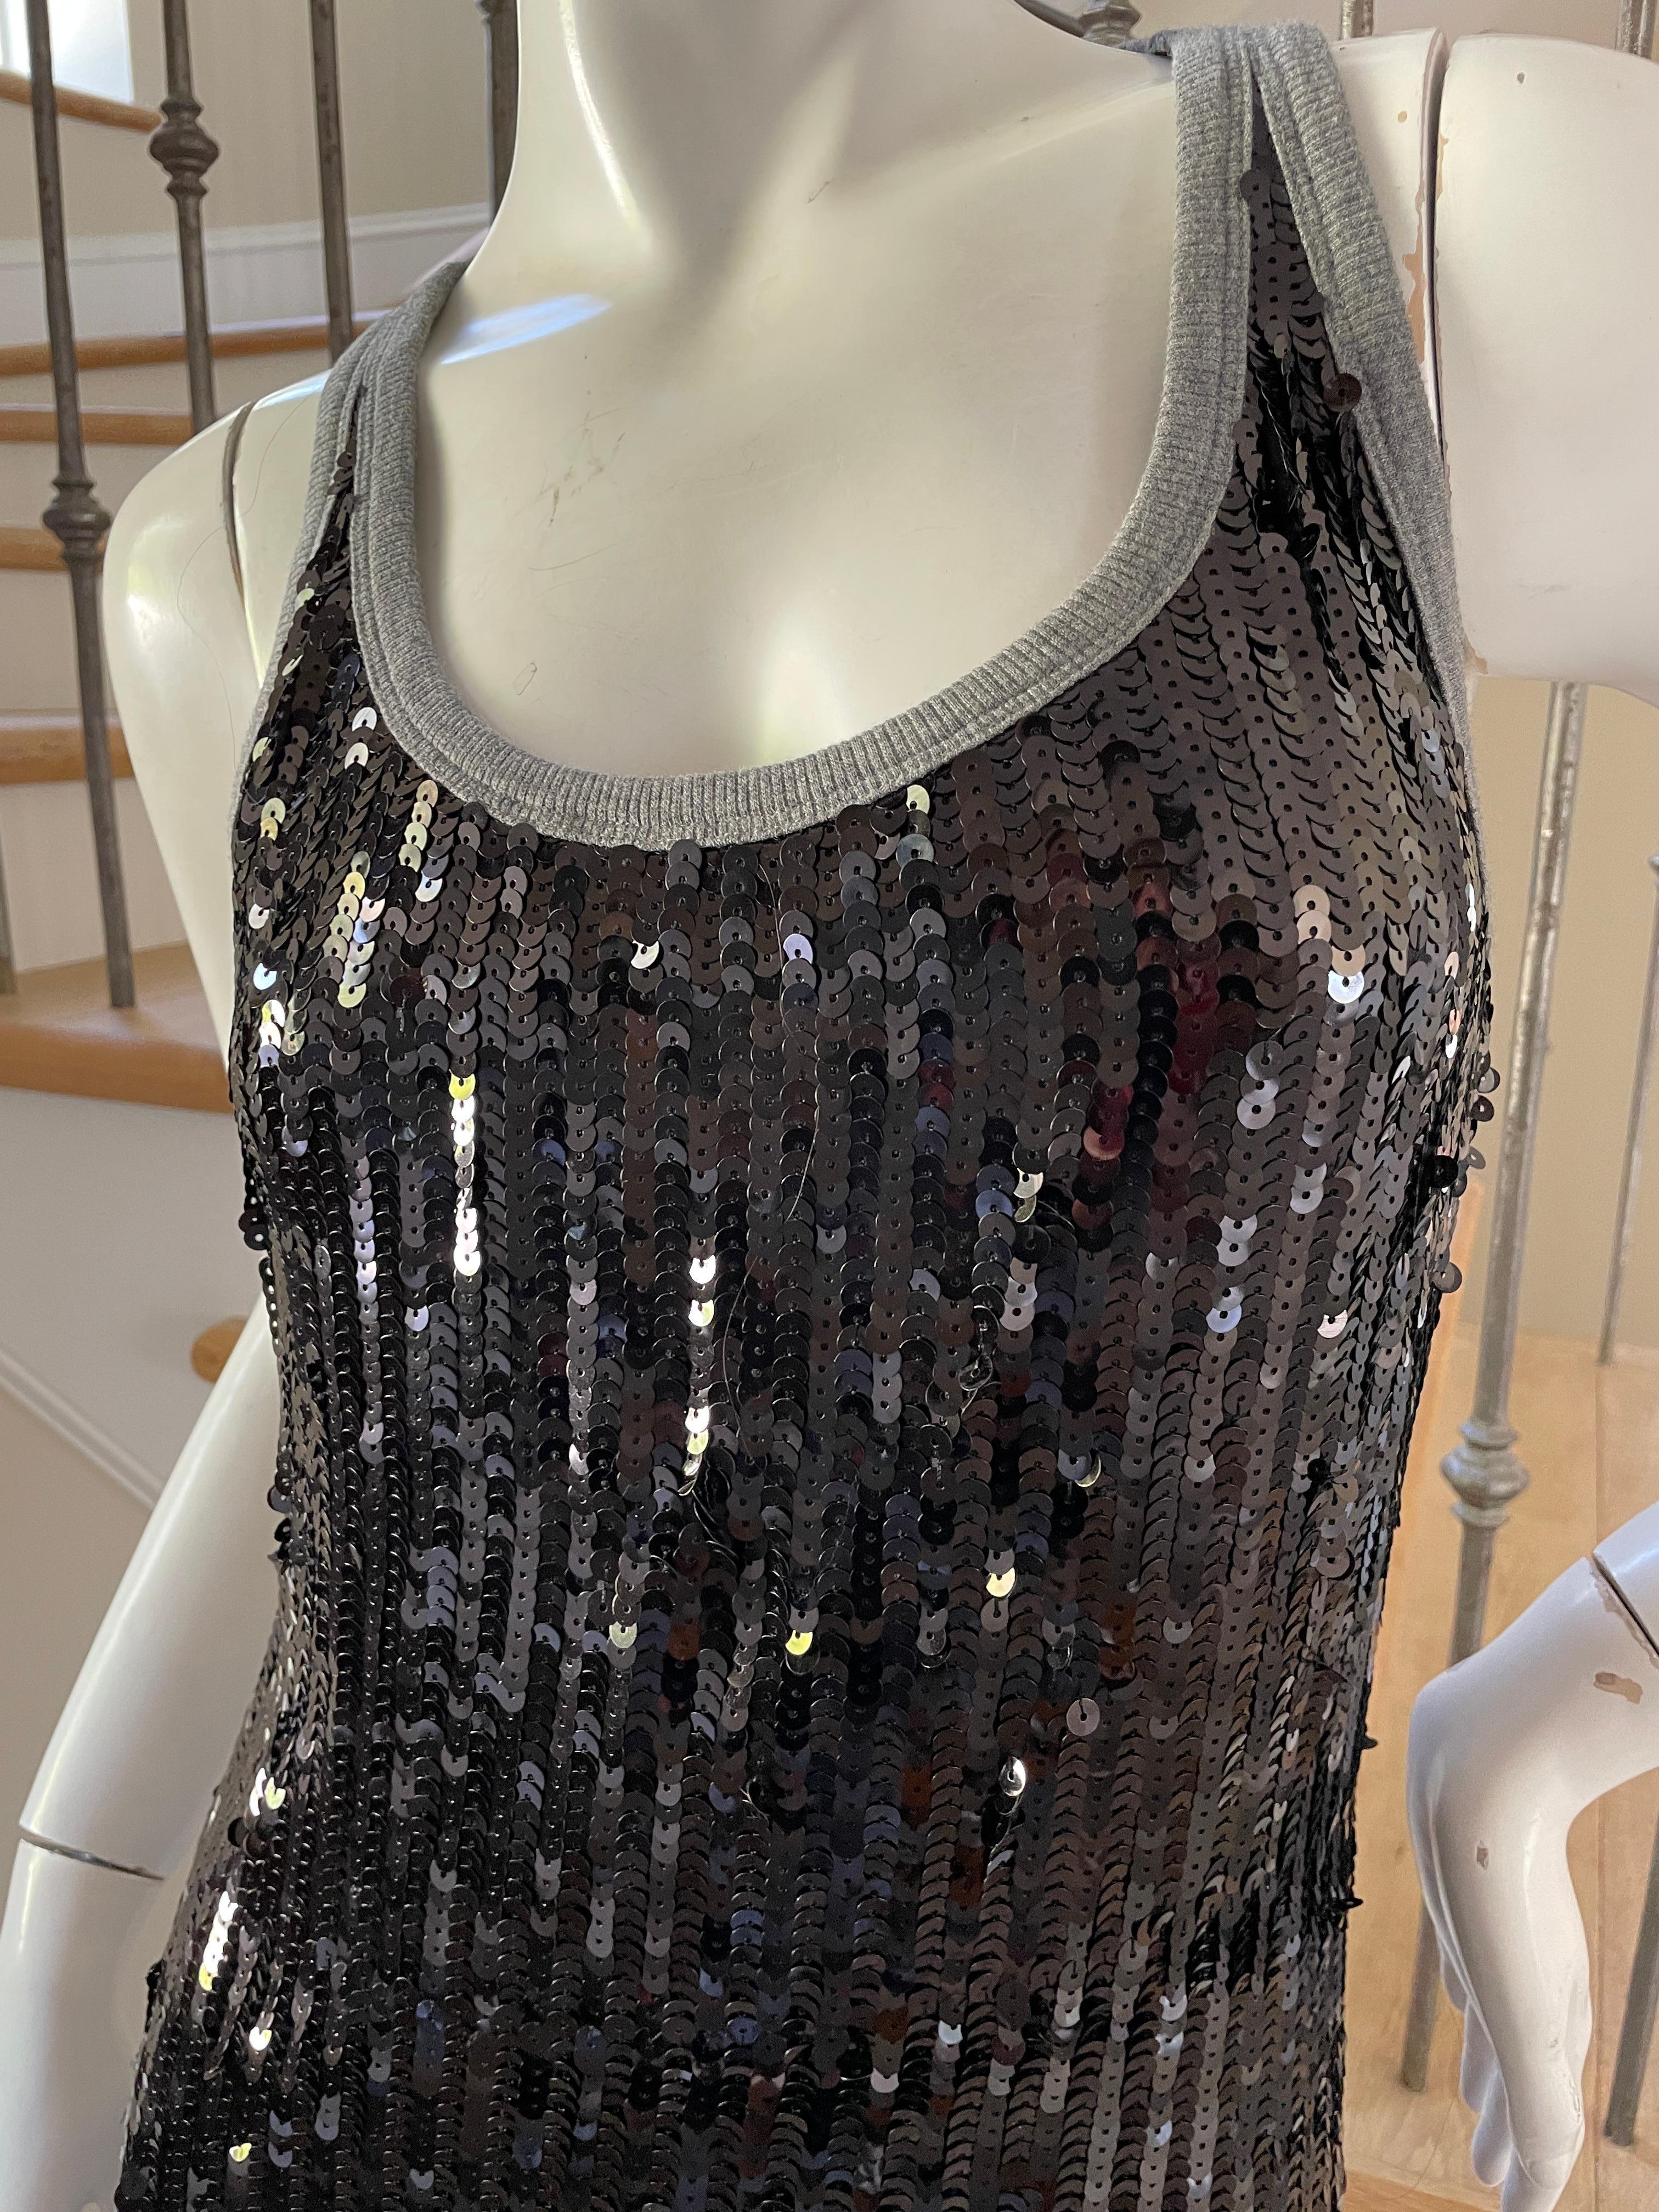 D&G by Dolce & Gabbana Vintage Silk Cotton Blend Black Sequin Dress In Excellent Condition For Sale In Cloverdale, CA